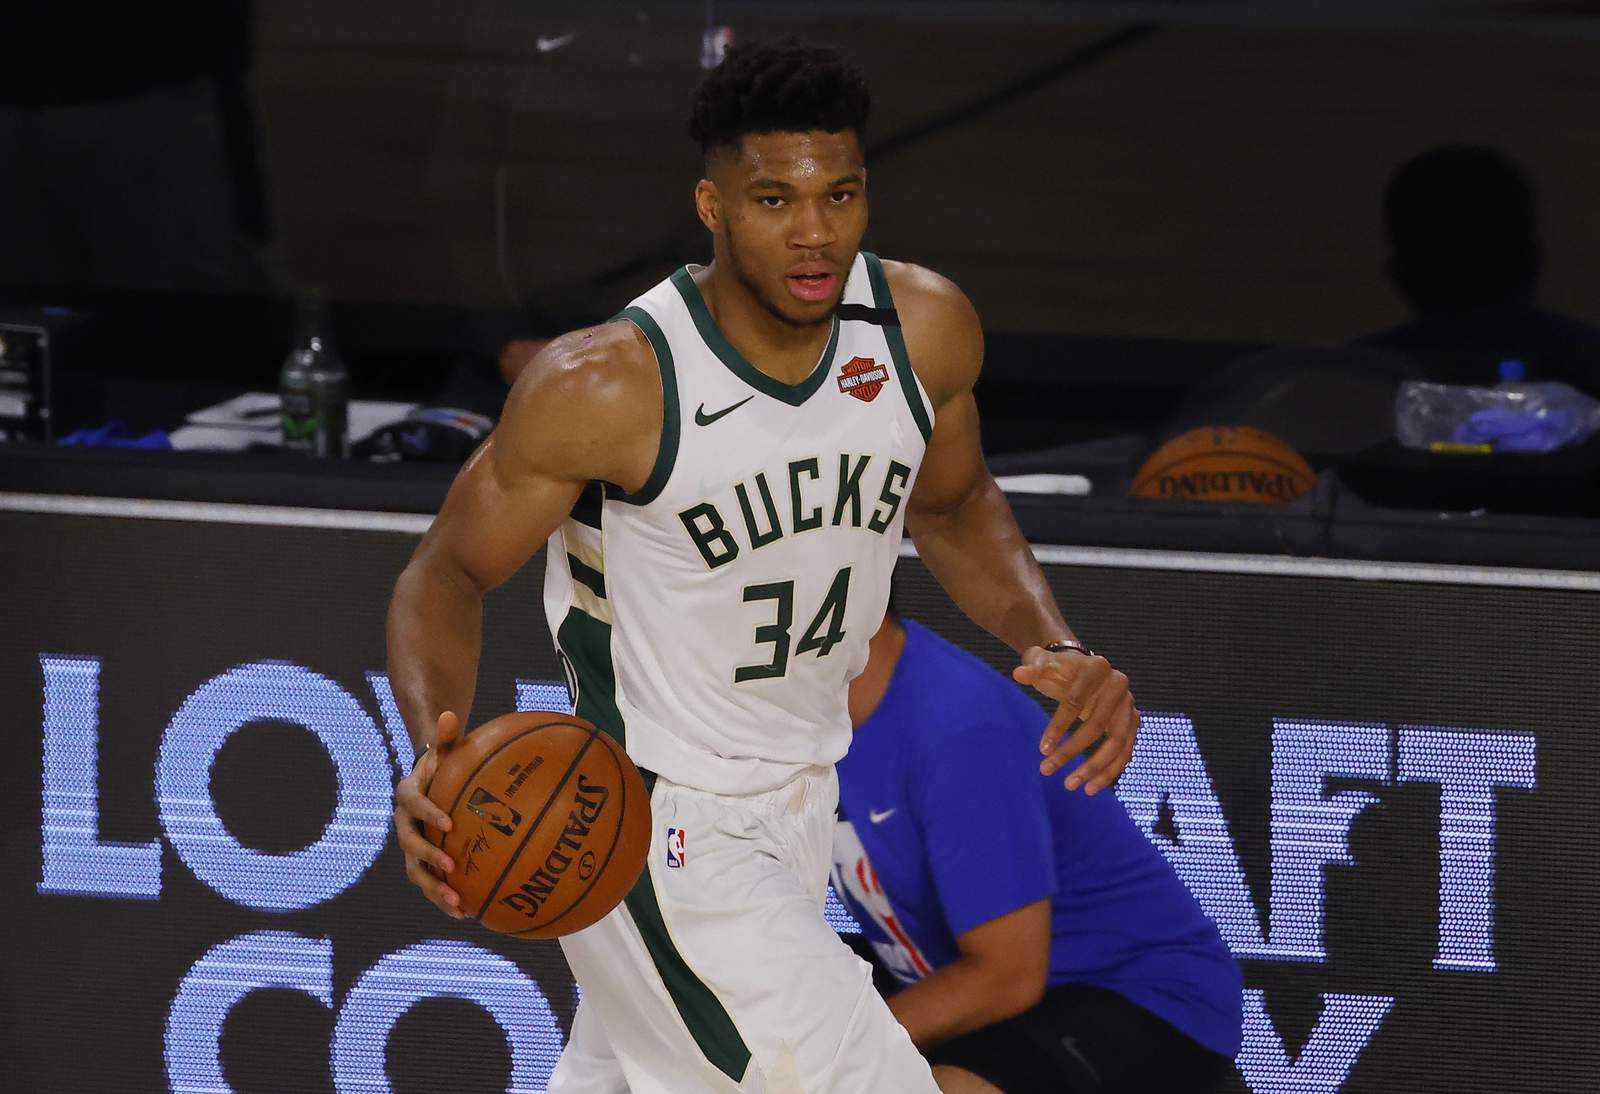 Bucks to boycott playoff game against Magic in protest of police shooting